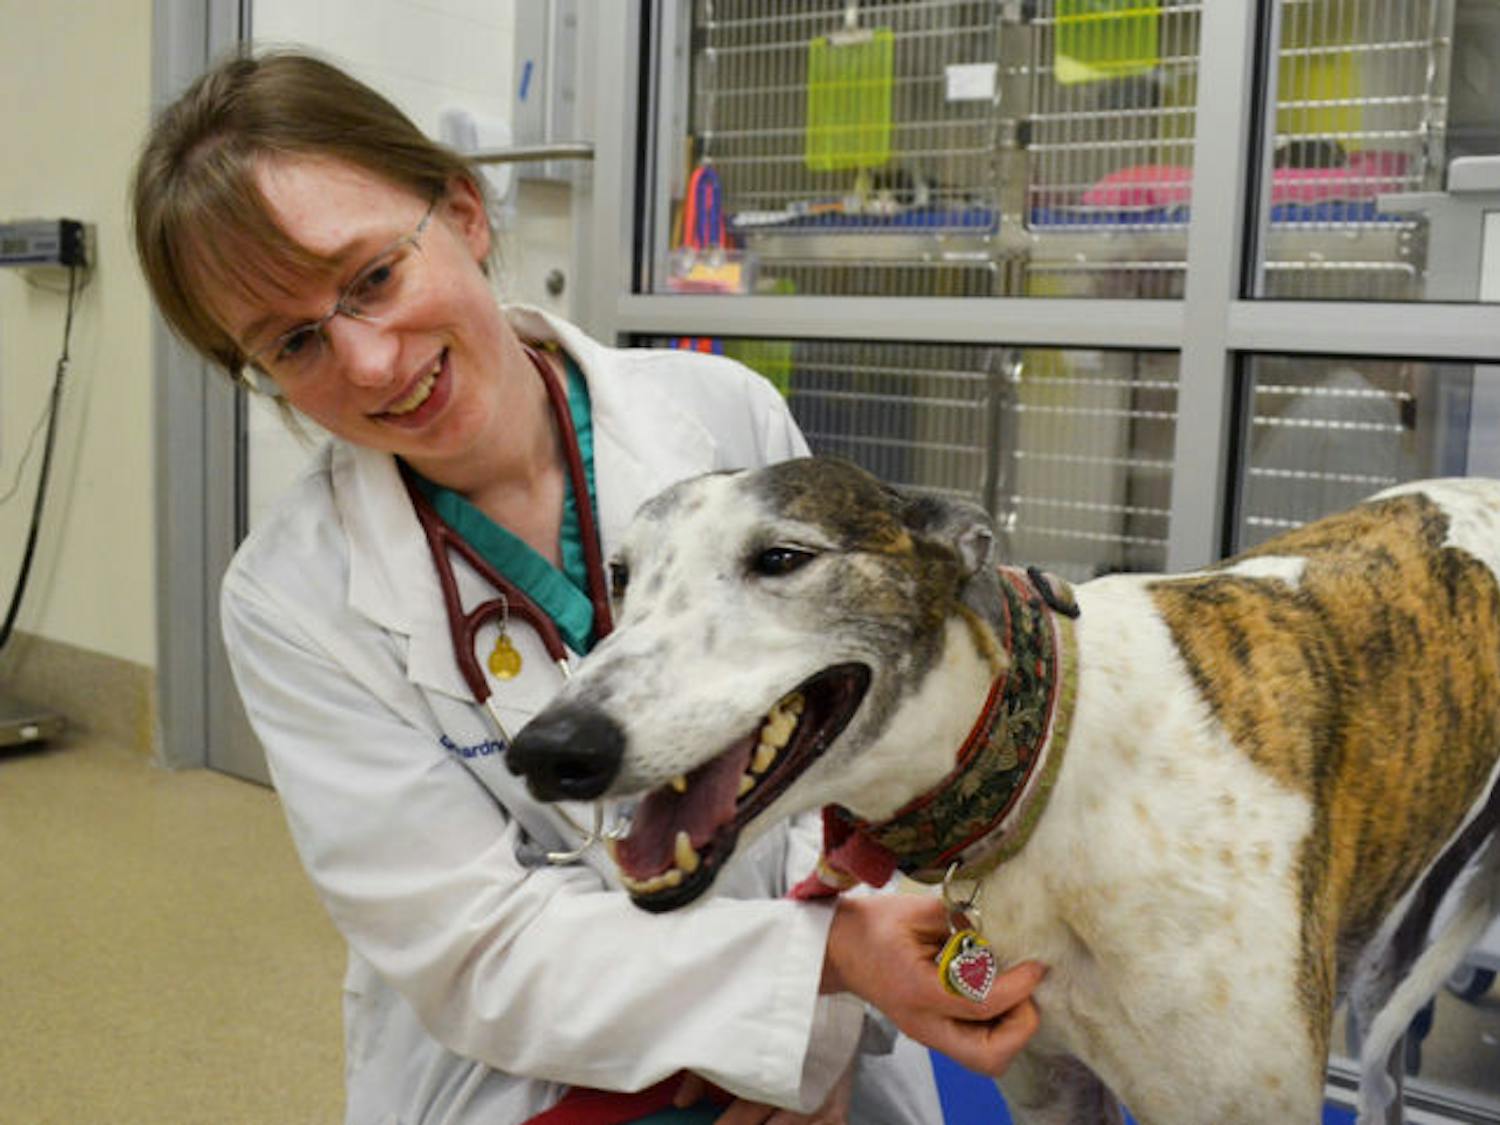 Dr. Heather Gardner, a 29-year-old oncology intern at the University of Florida Small Animal Hospital, performs an exam on Anora, a greyhound with cancer.